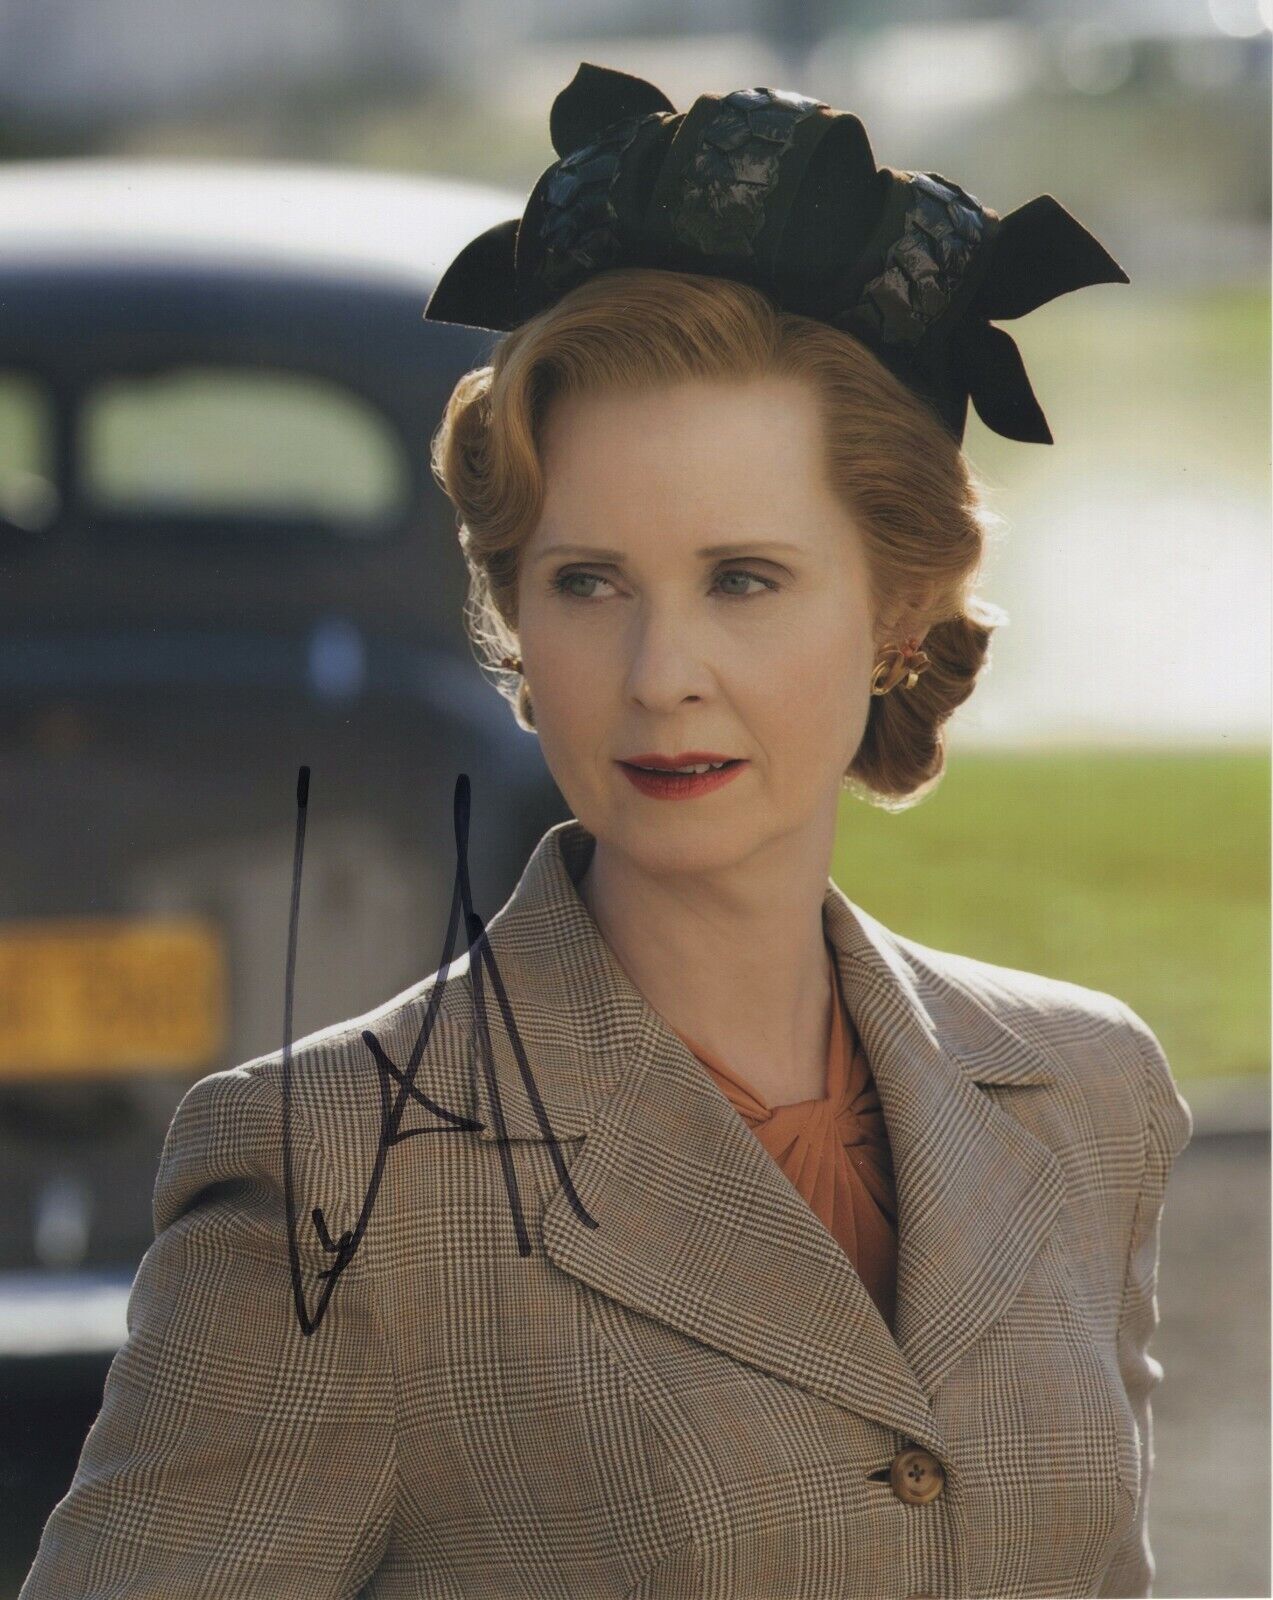 CYNTHIA NIXON SIGNED AUTOGRAPH 8X10 Photo Poster painting Emily Dickinson SEX IN THE CITY